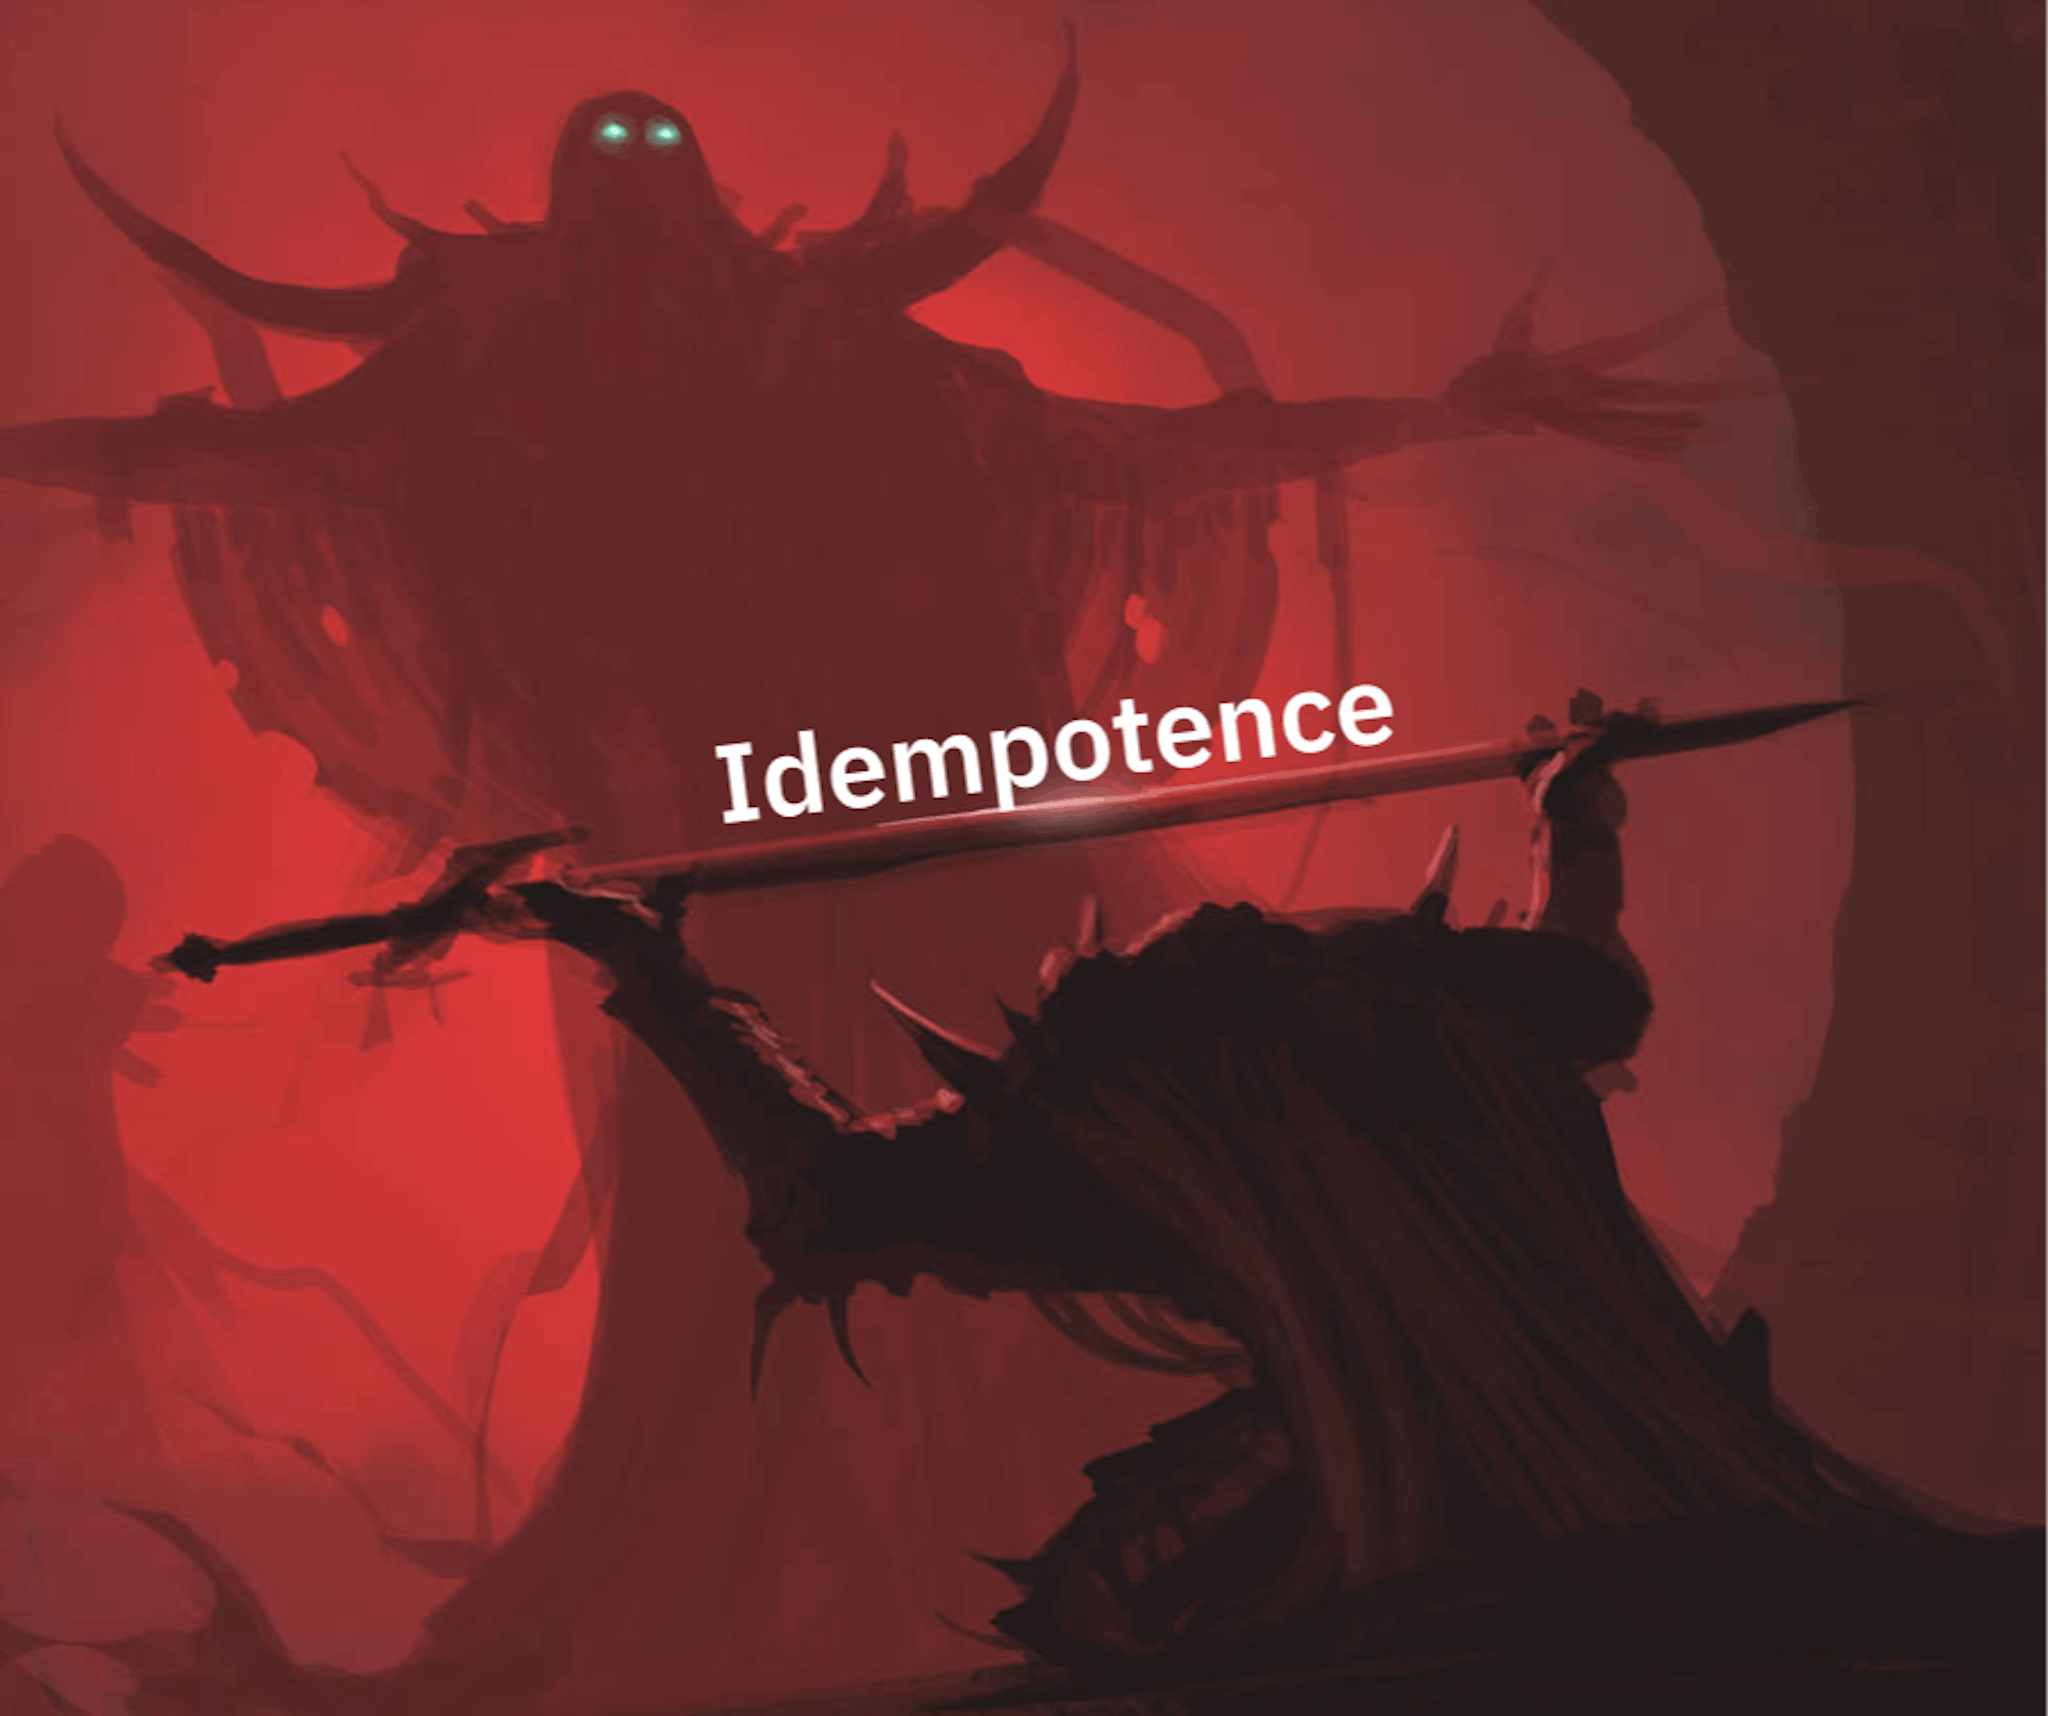 Idempotence will help you in your battles